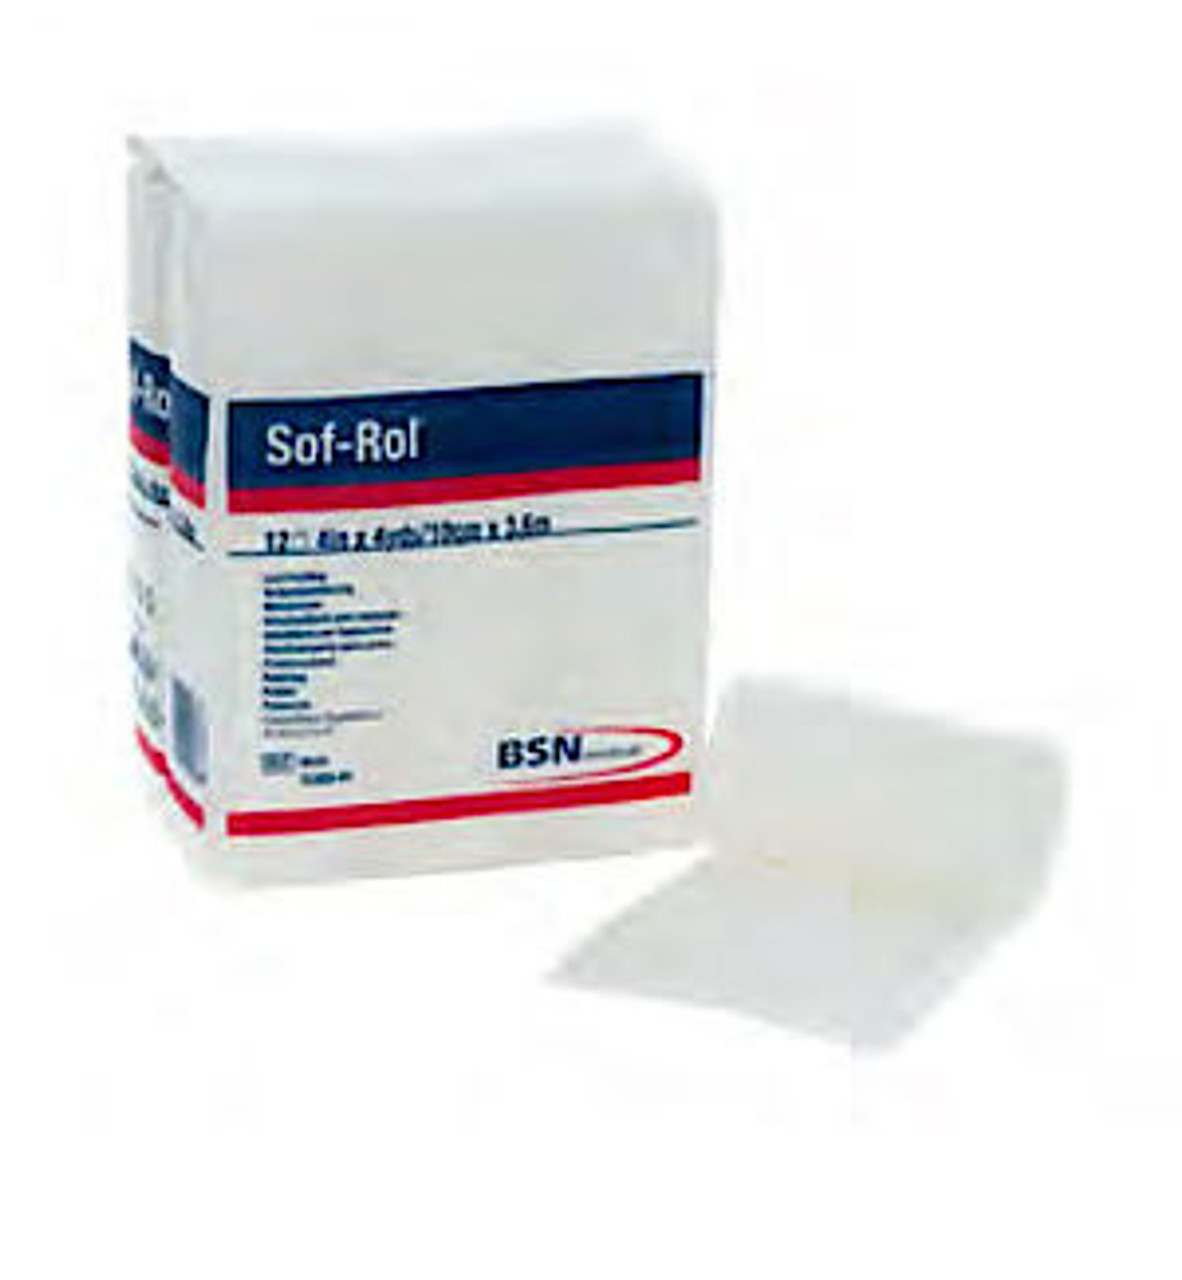 BSN-7234510 BX/20 SOF-ROL STERILE SYNTHETIC CAST PADDING 5CM X 3.6M